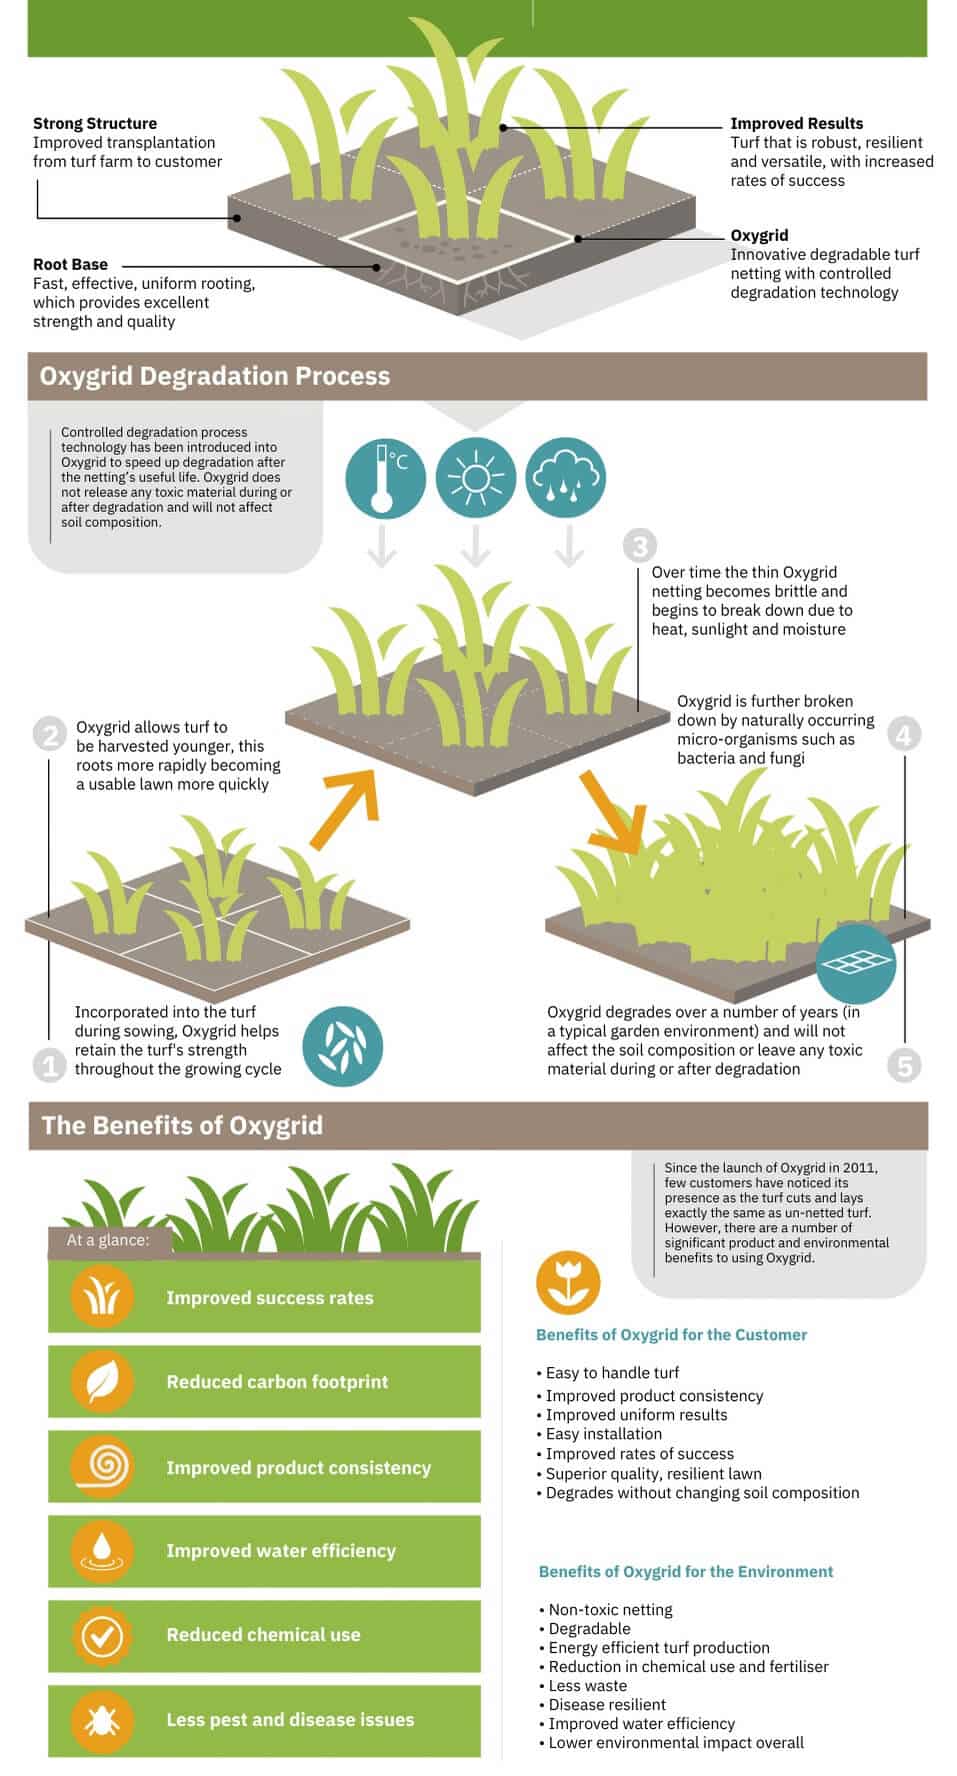 Infographic showing the benefits of using Oxygrid netting for turf cultivation